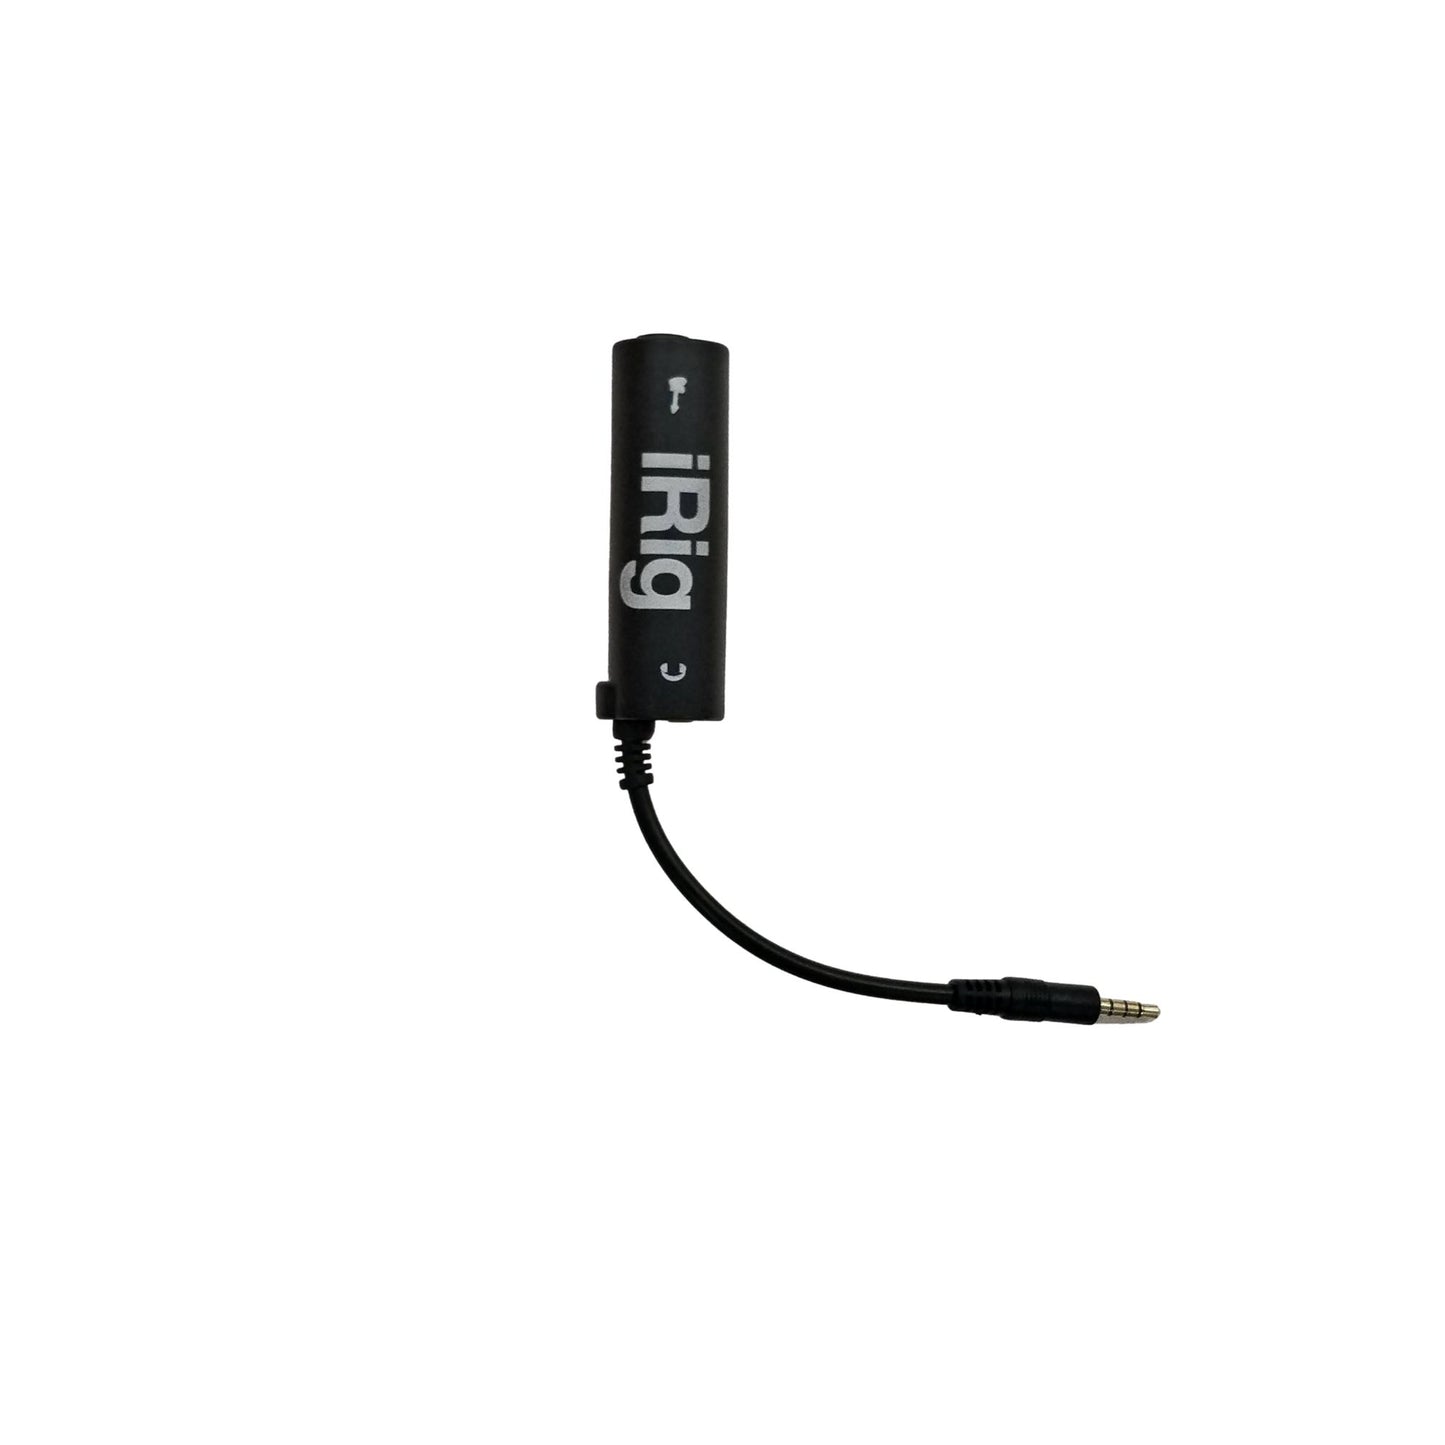 6.5mm to 3.5mm TRRS Adapter - iPhone Guitar Adapter - 1/4 Inch to 1/8 Inch Connector - iRig - Nefficar